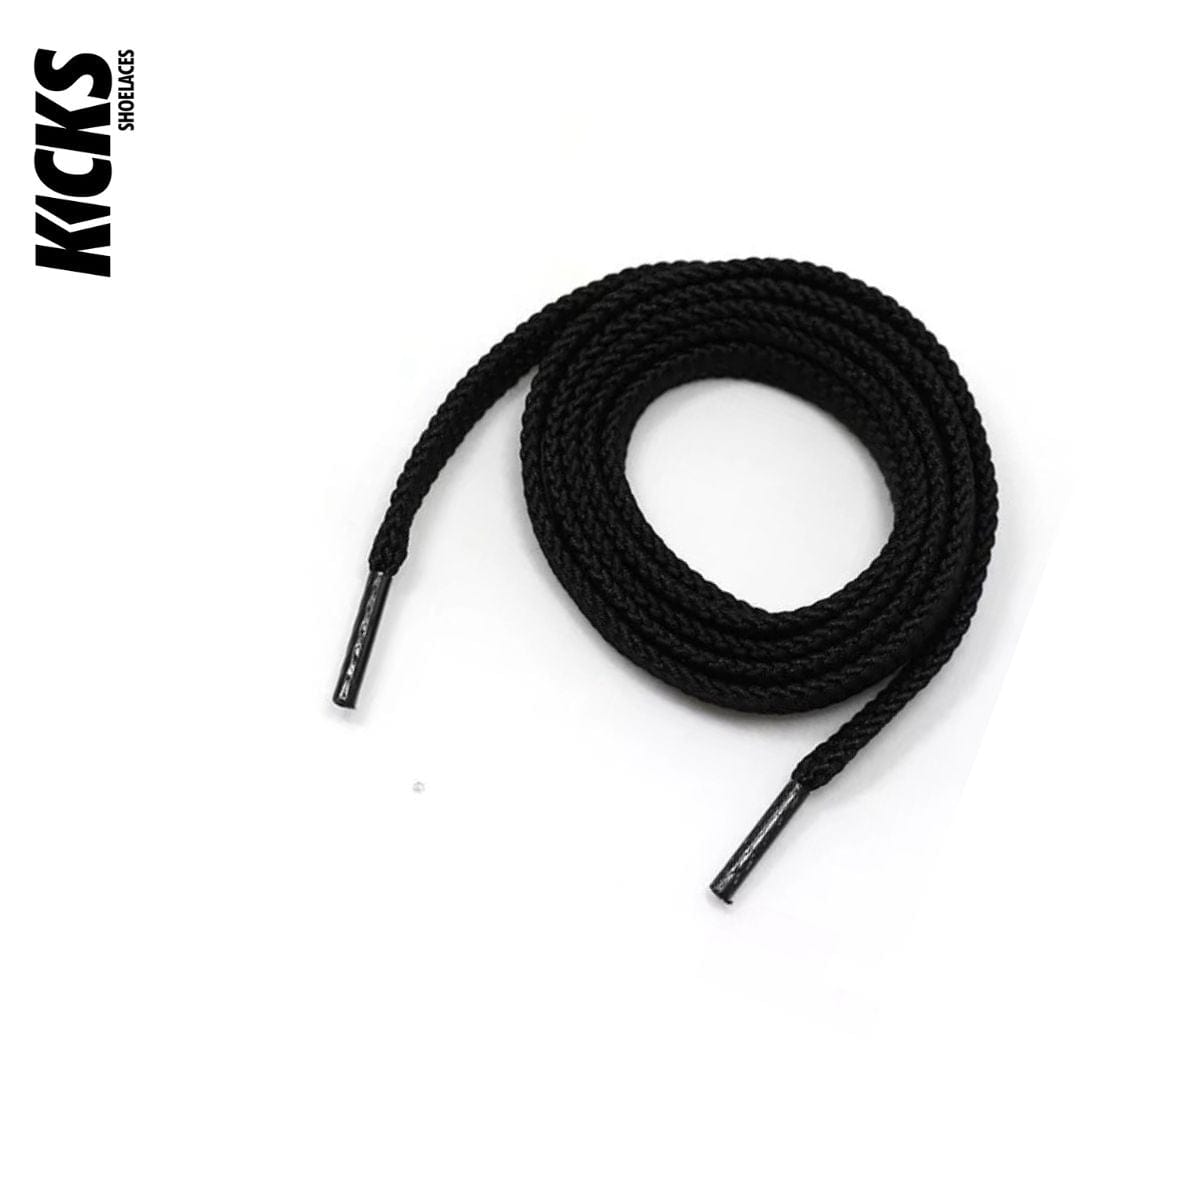 Black Replacement New Balance Laces for New Balance Shoes by Kicks Shoelaces